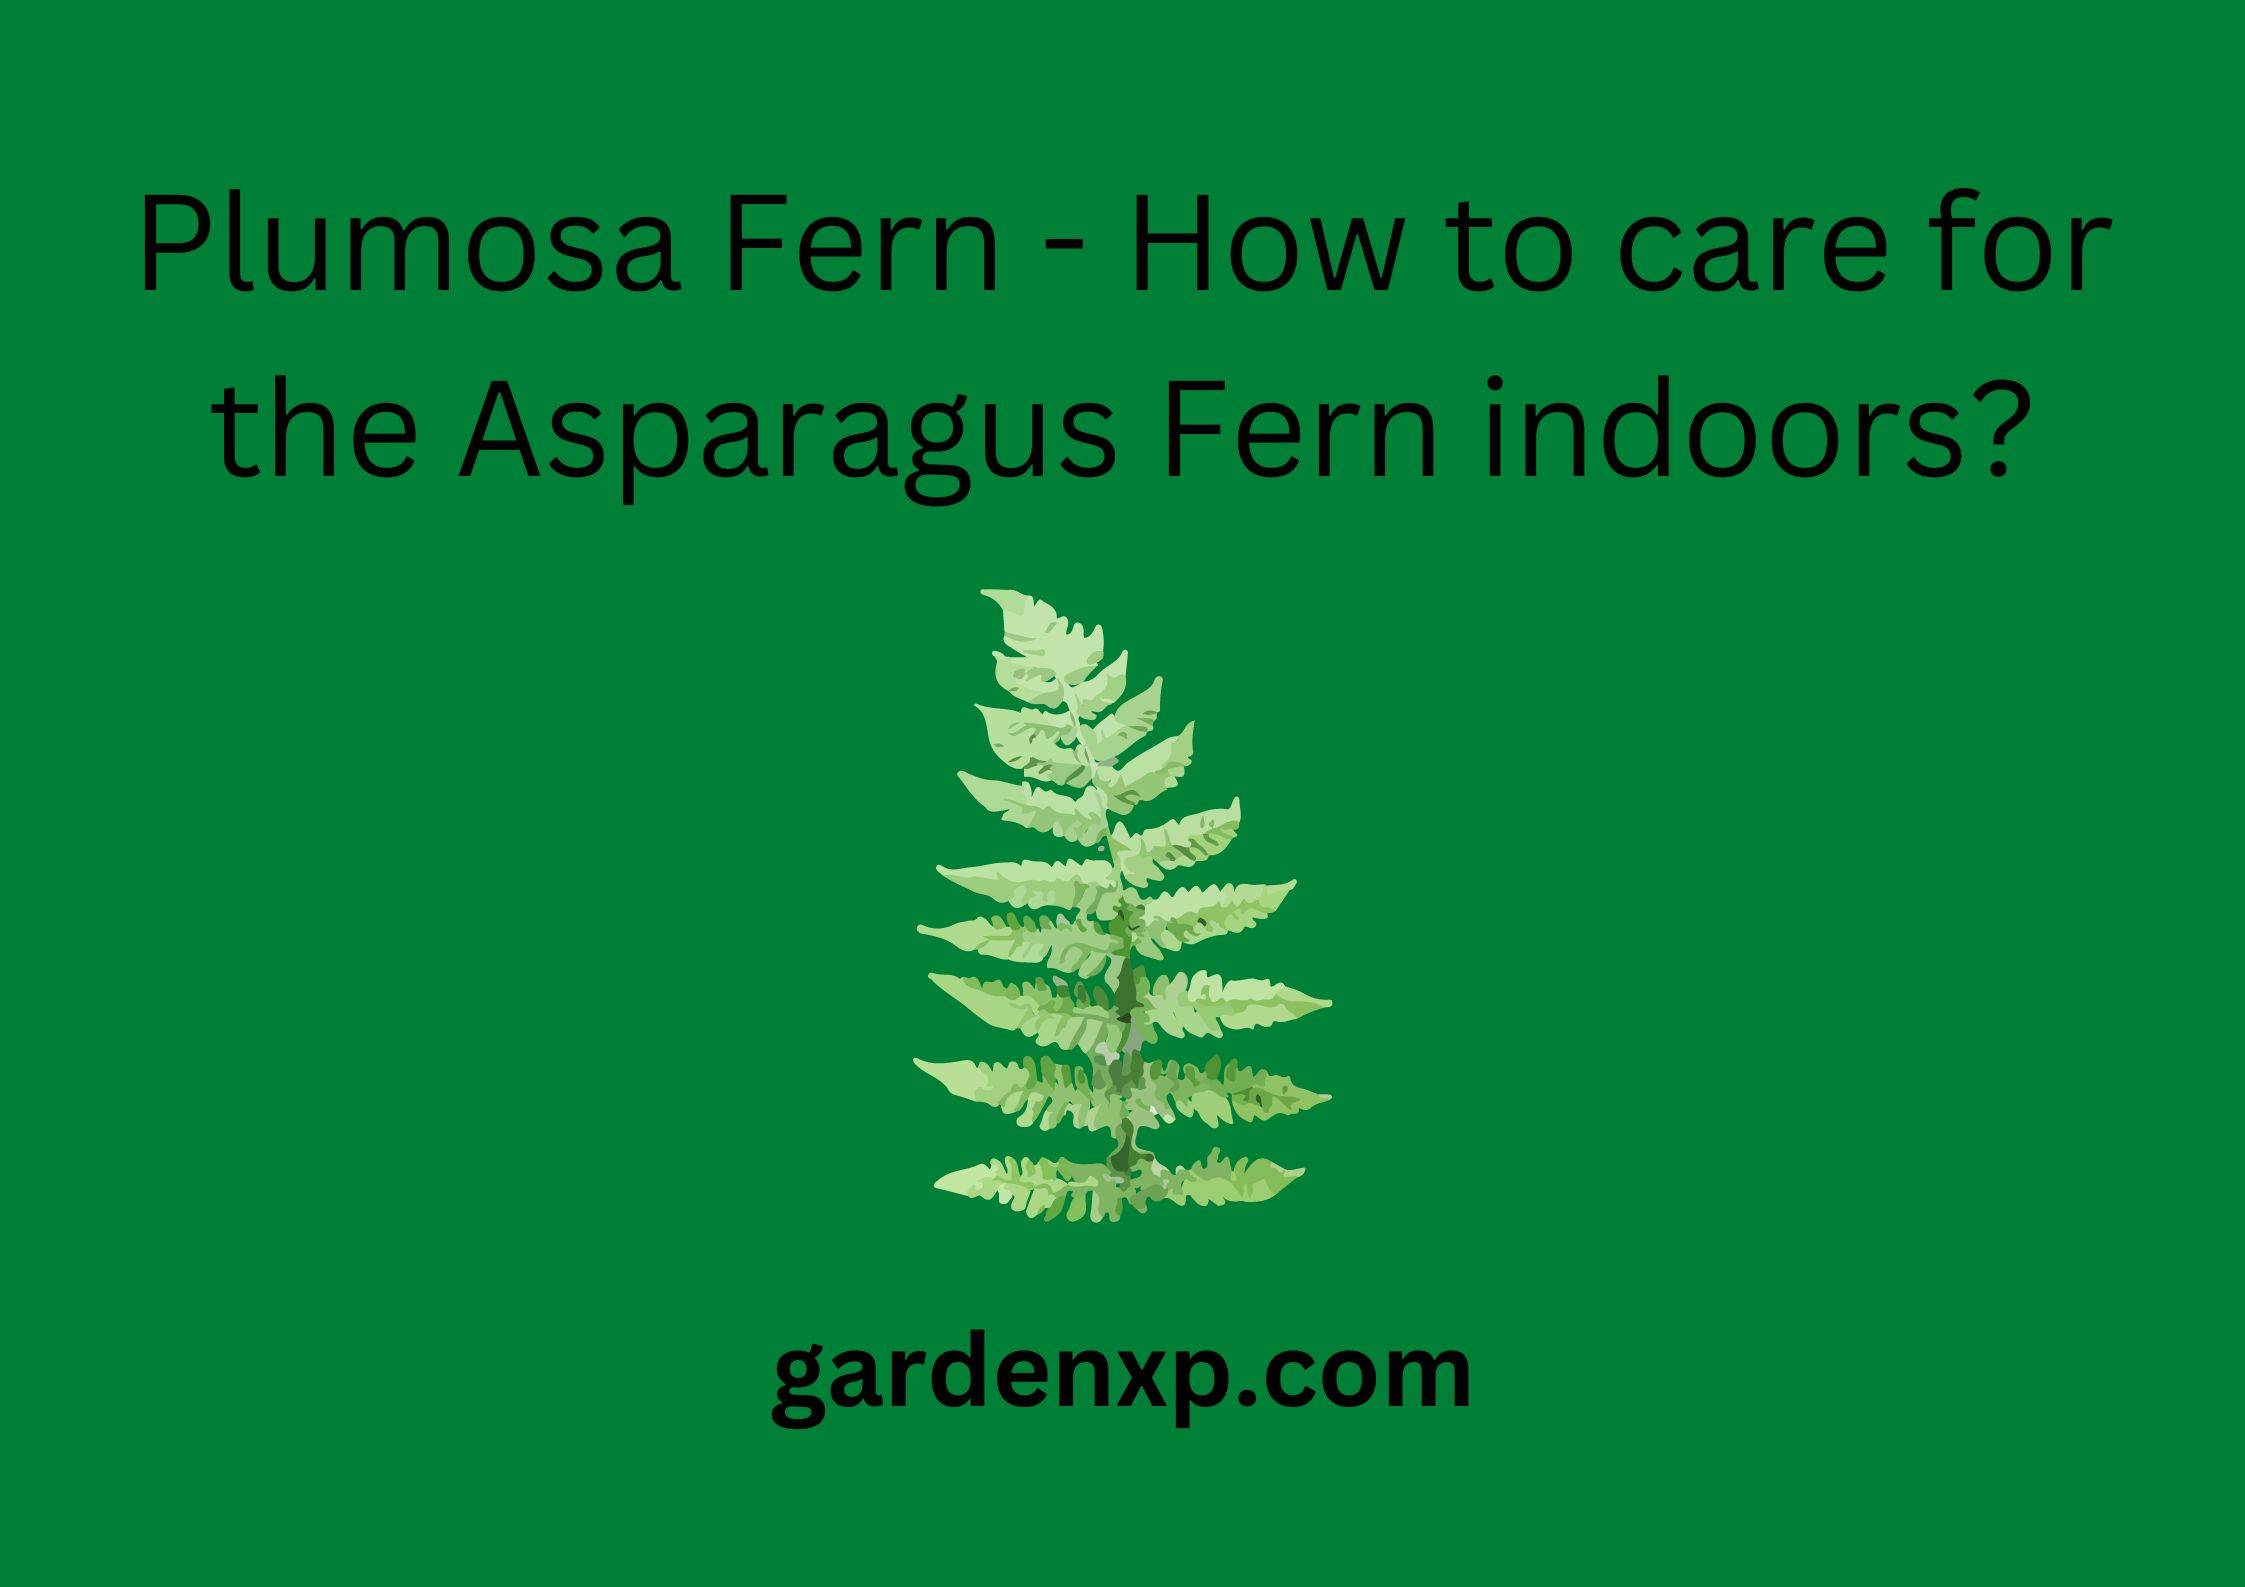 Plumosa Fern - How to care for the Asparagus Fern indoors?